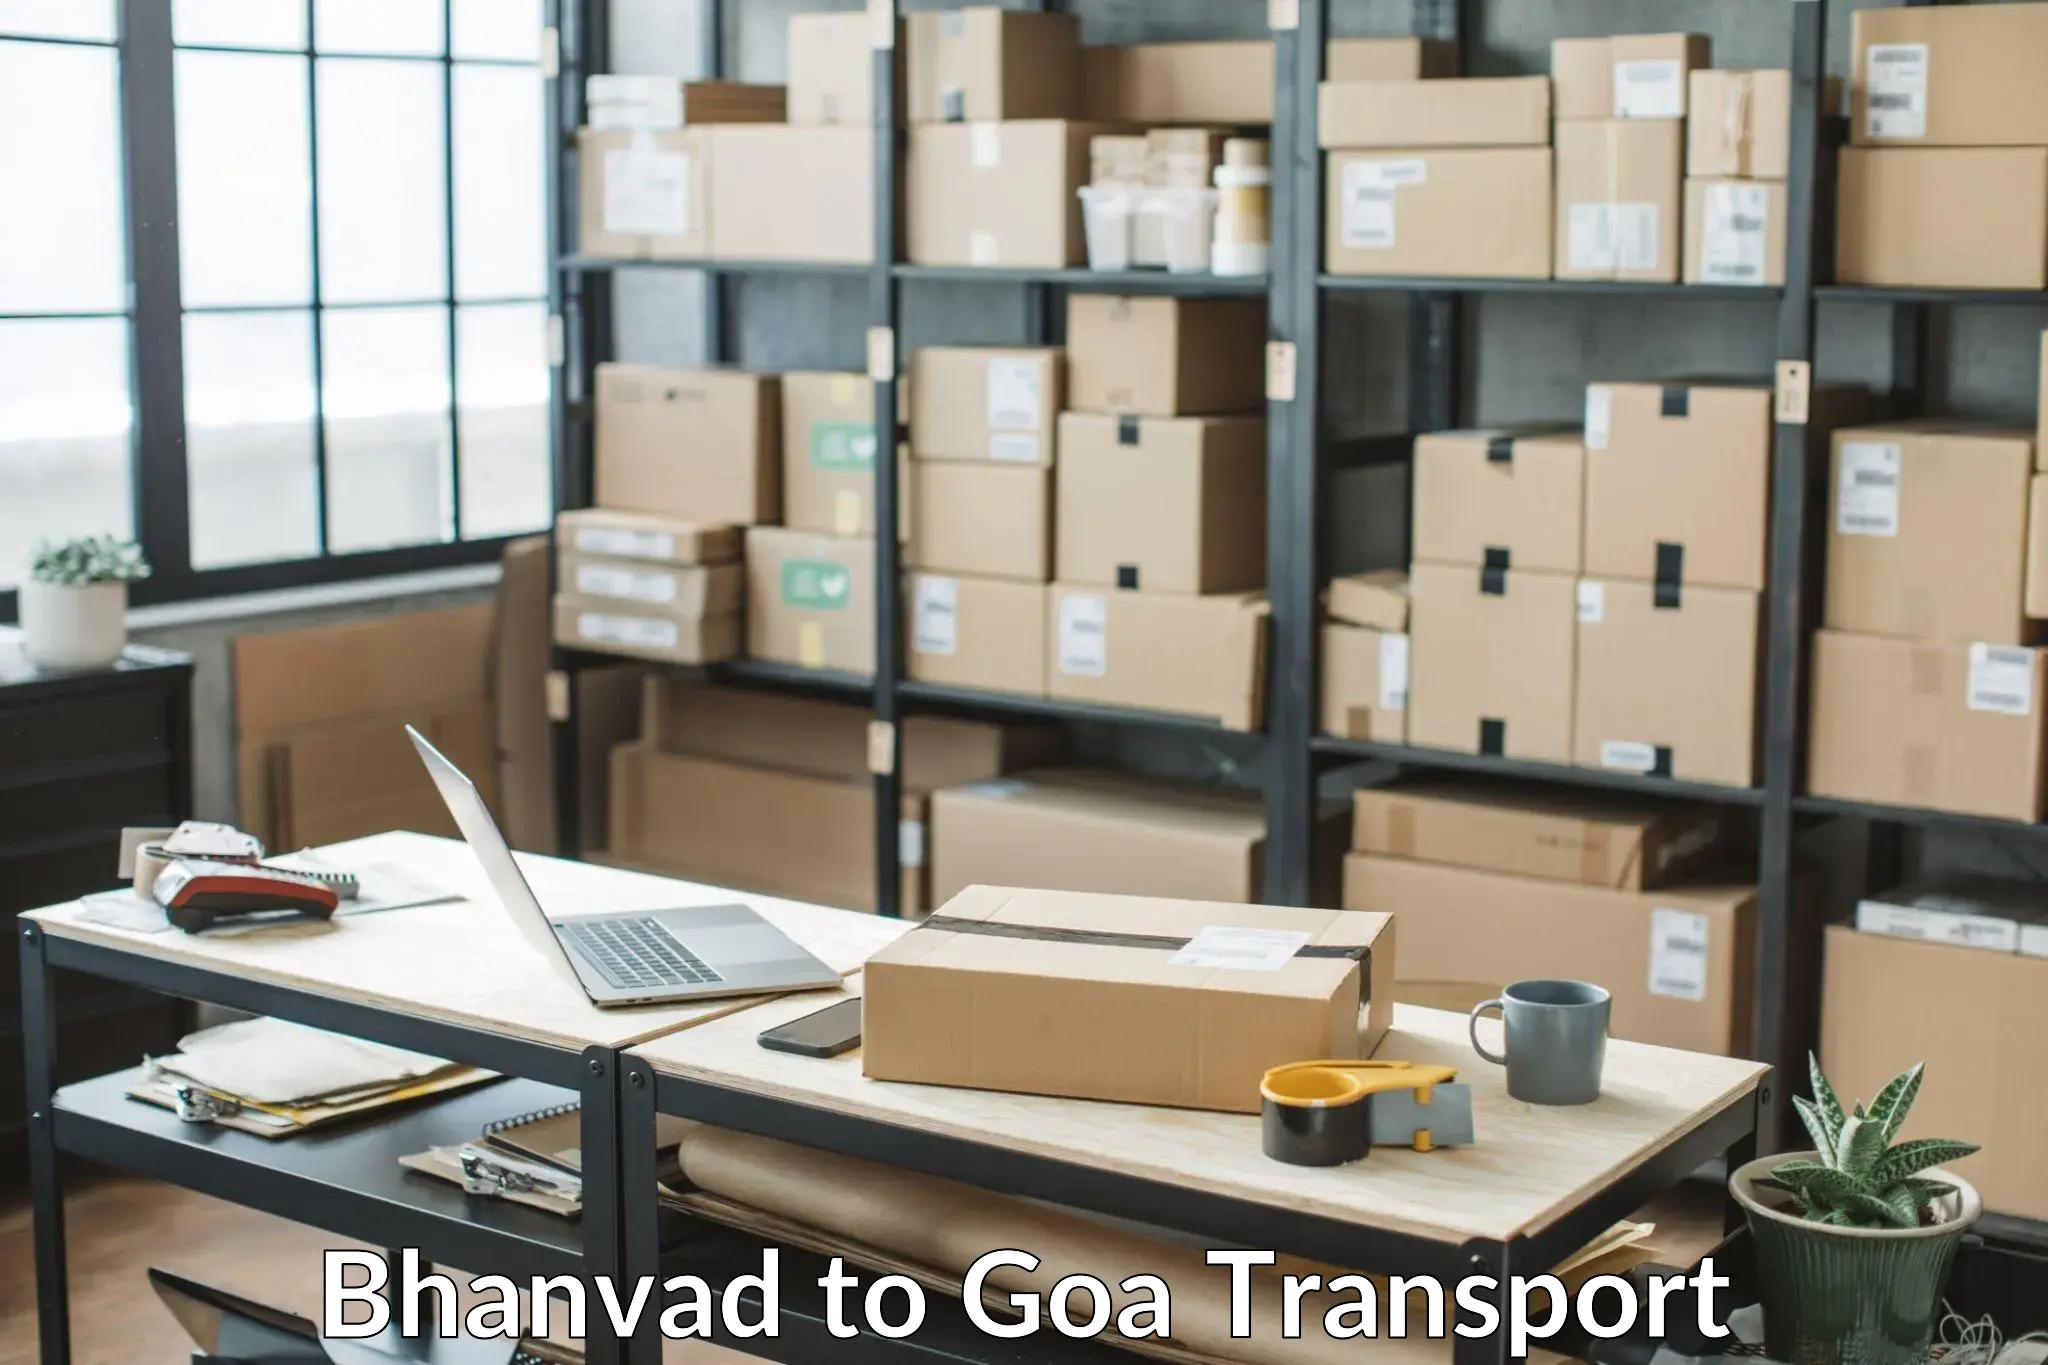 Land transport services in Bhanvad to Mormugao Port